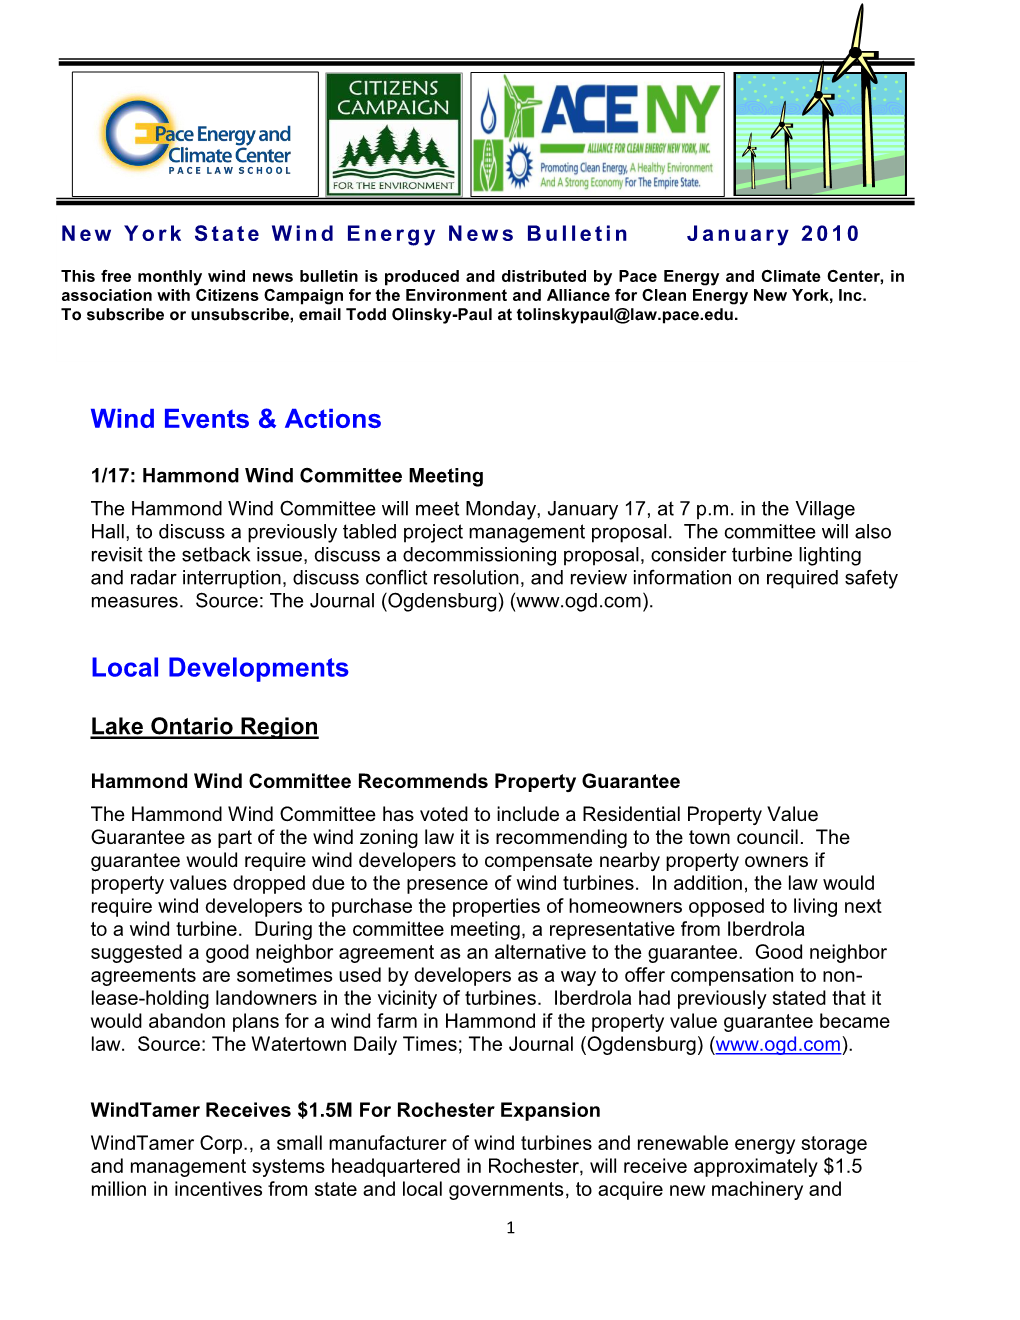 Wind Events & Actions Local Developments